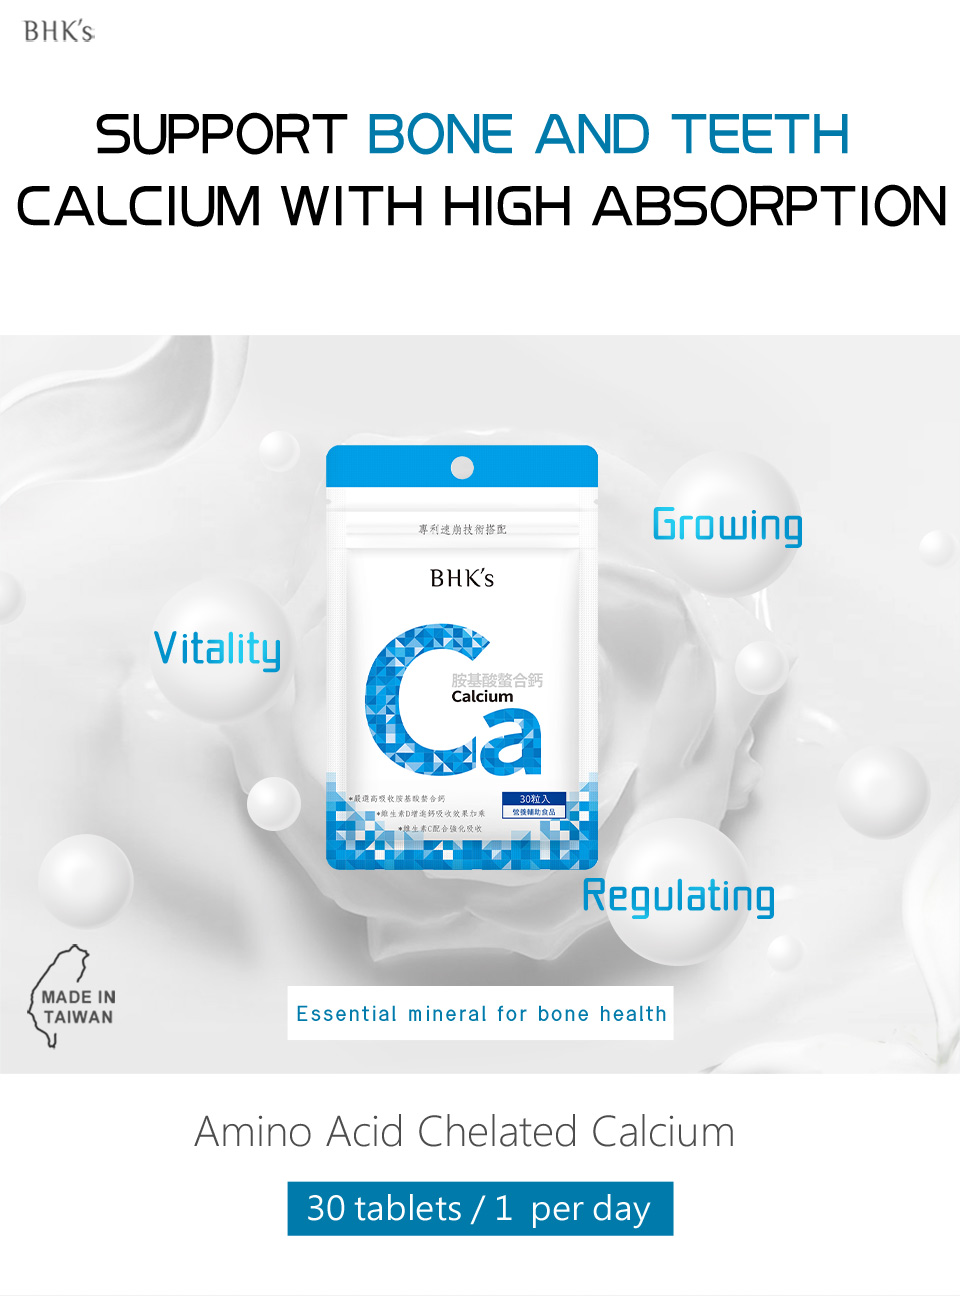 Getting enough calcium from now, BHK's calcium helps bone much strong and health